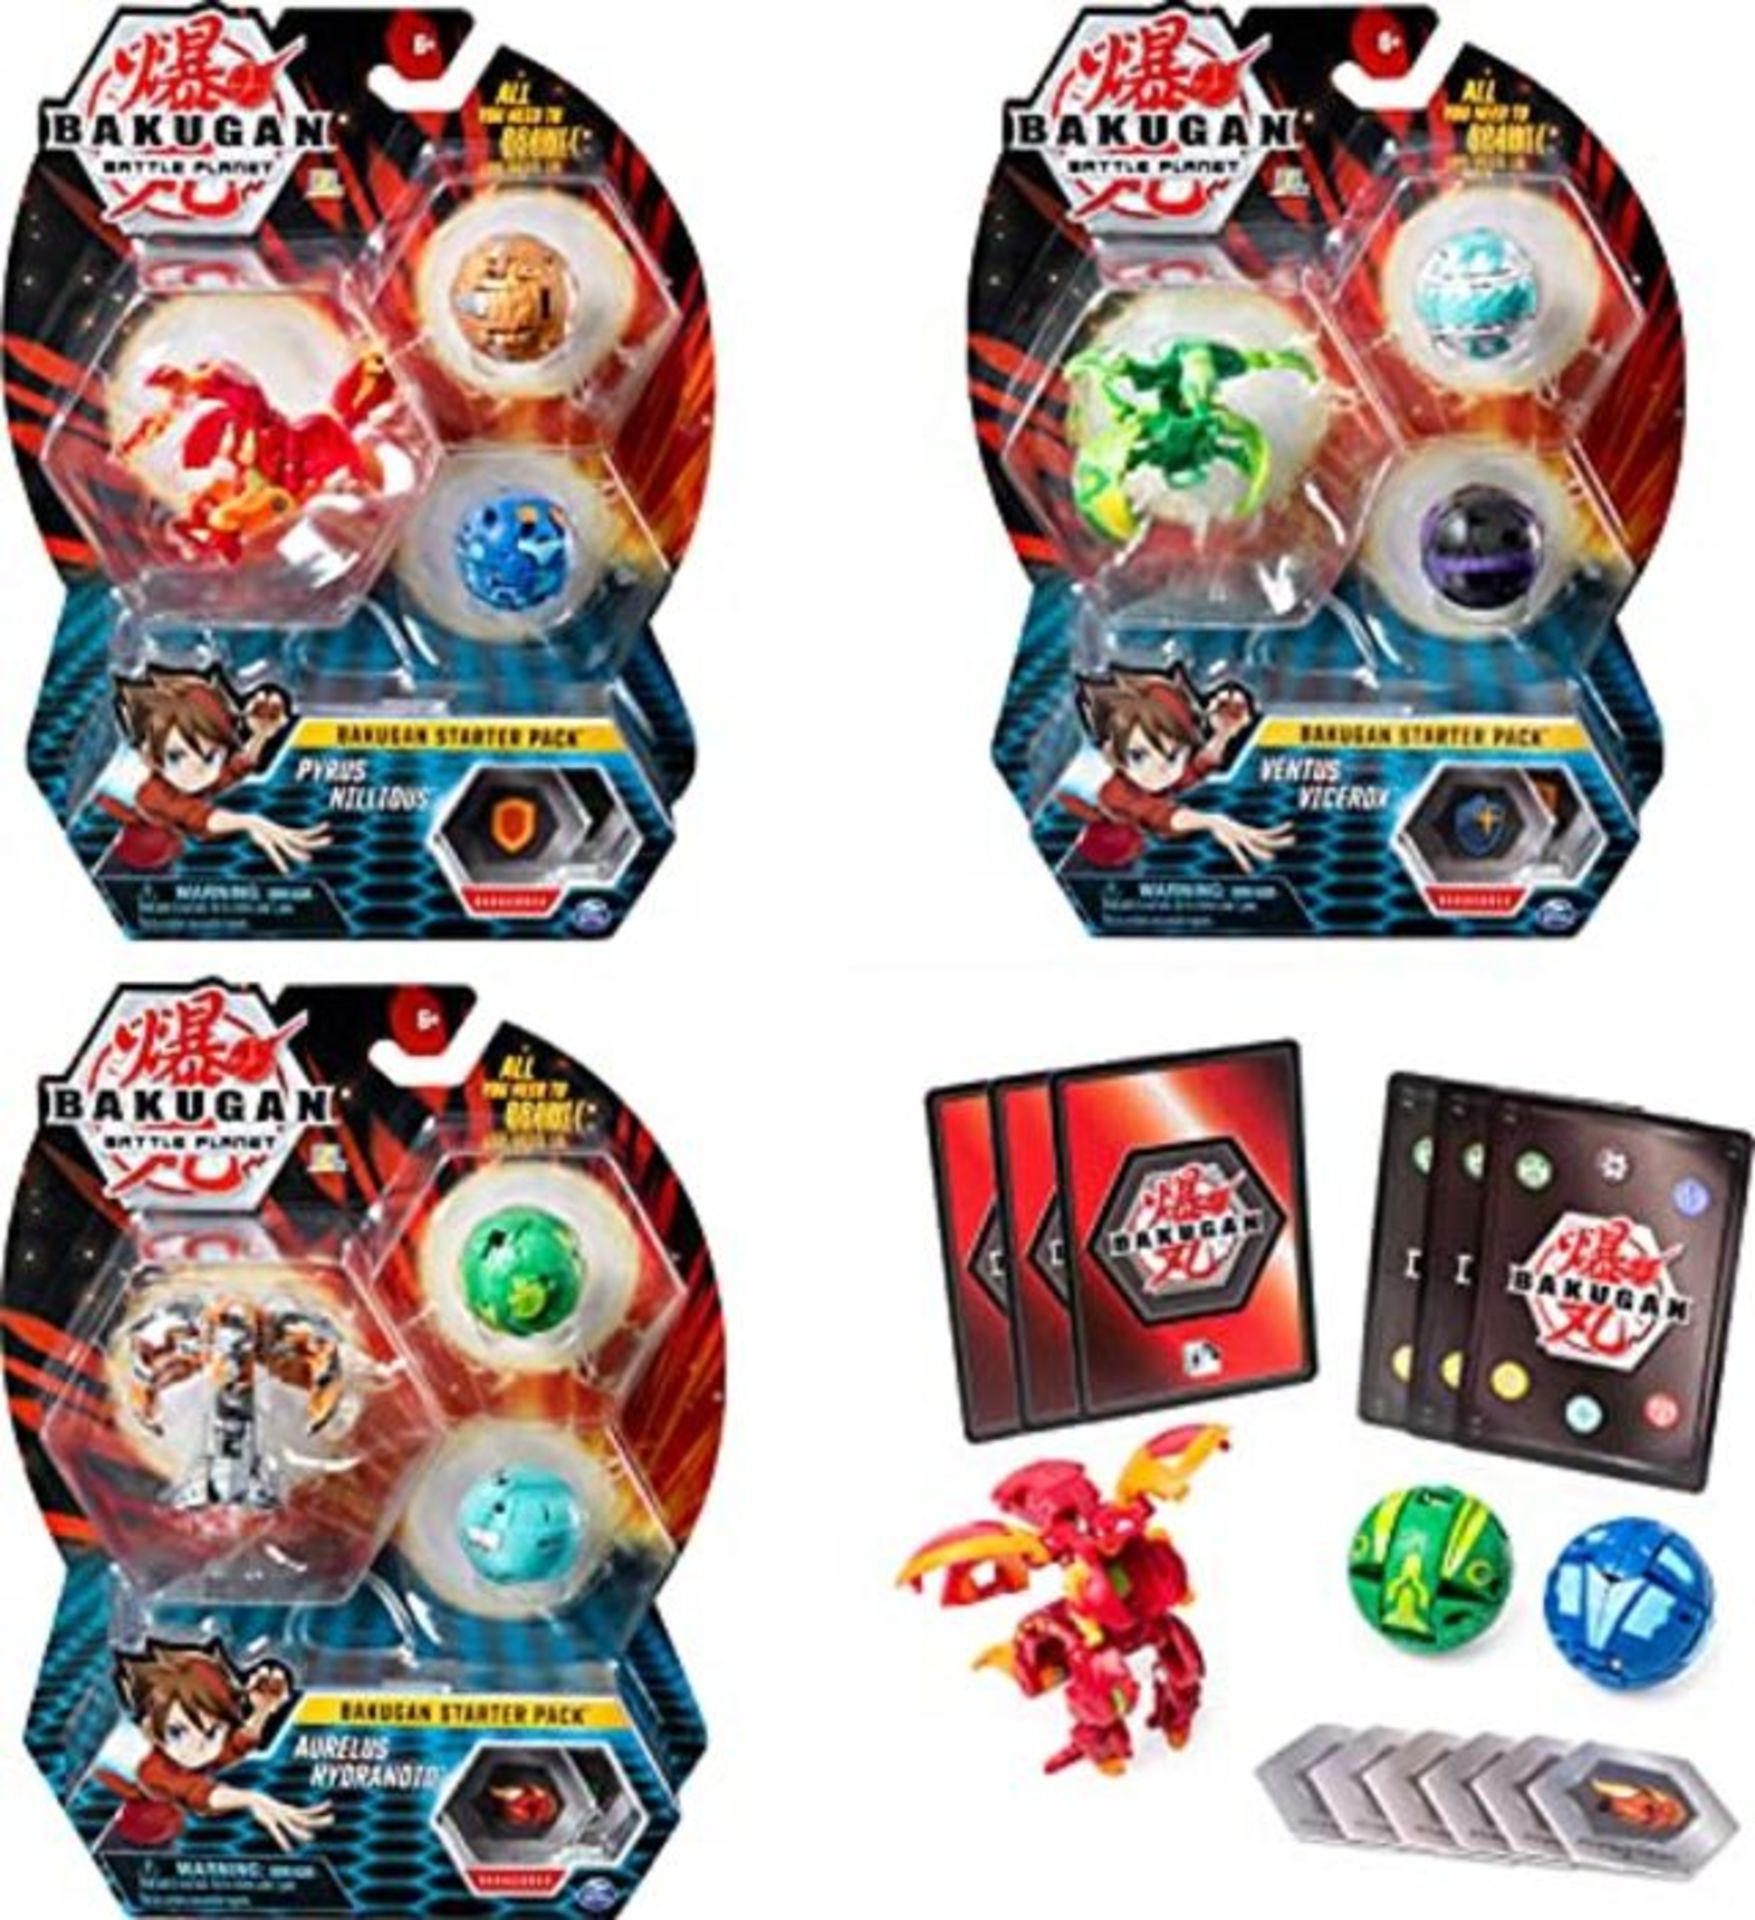 BAKUGAN 6045144 Starter Pack Set Assortment (Styles May Vary-One Supplied), Multi Colo